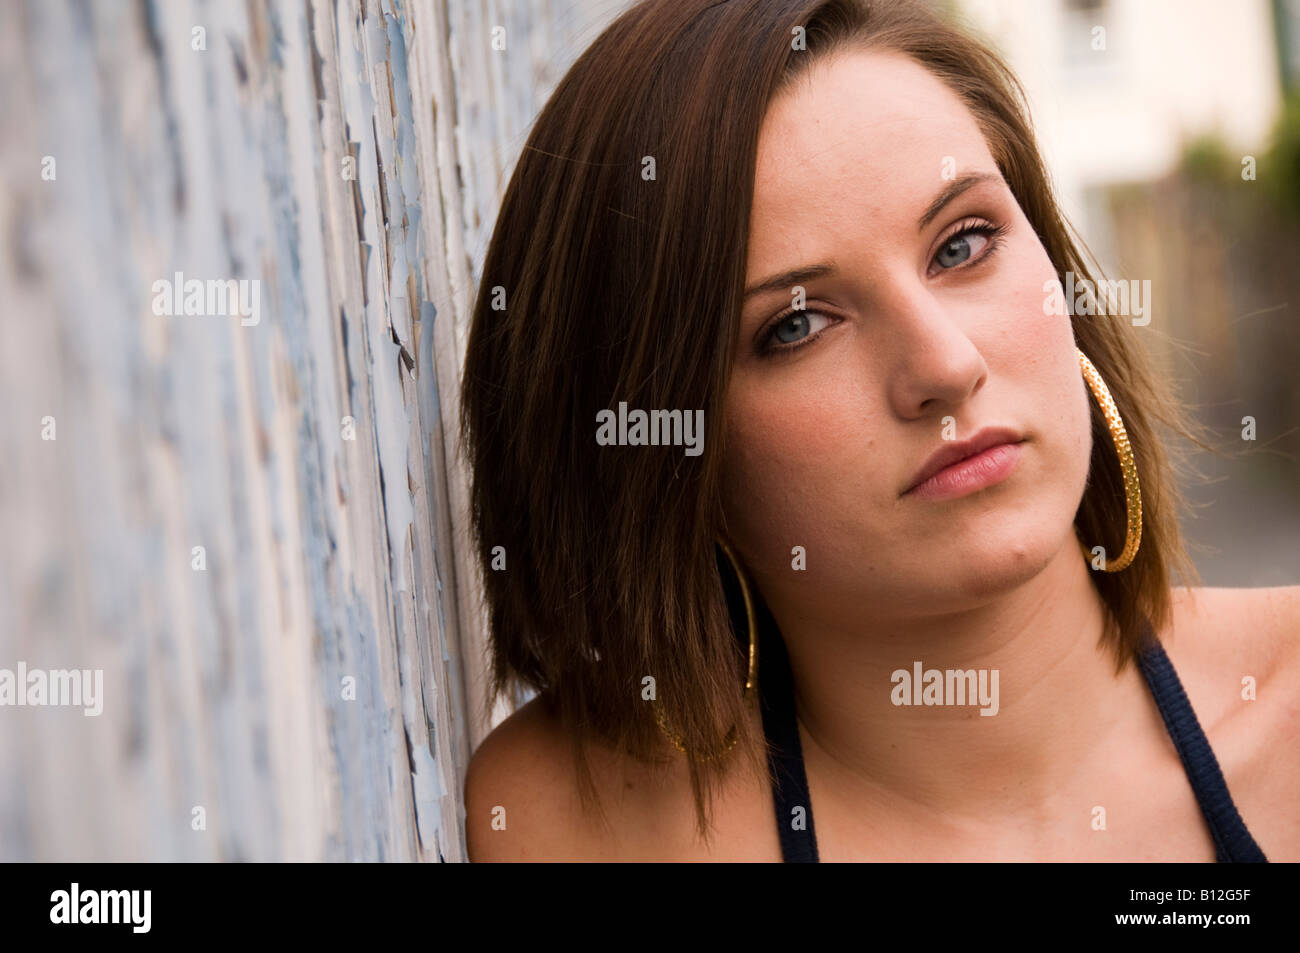 Young 19 year old Teenage girl leaning on peeling blue painted wooden wall looking moody, wales UK Stock Photo